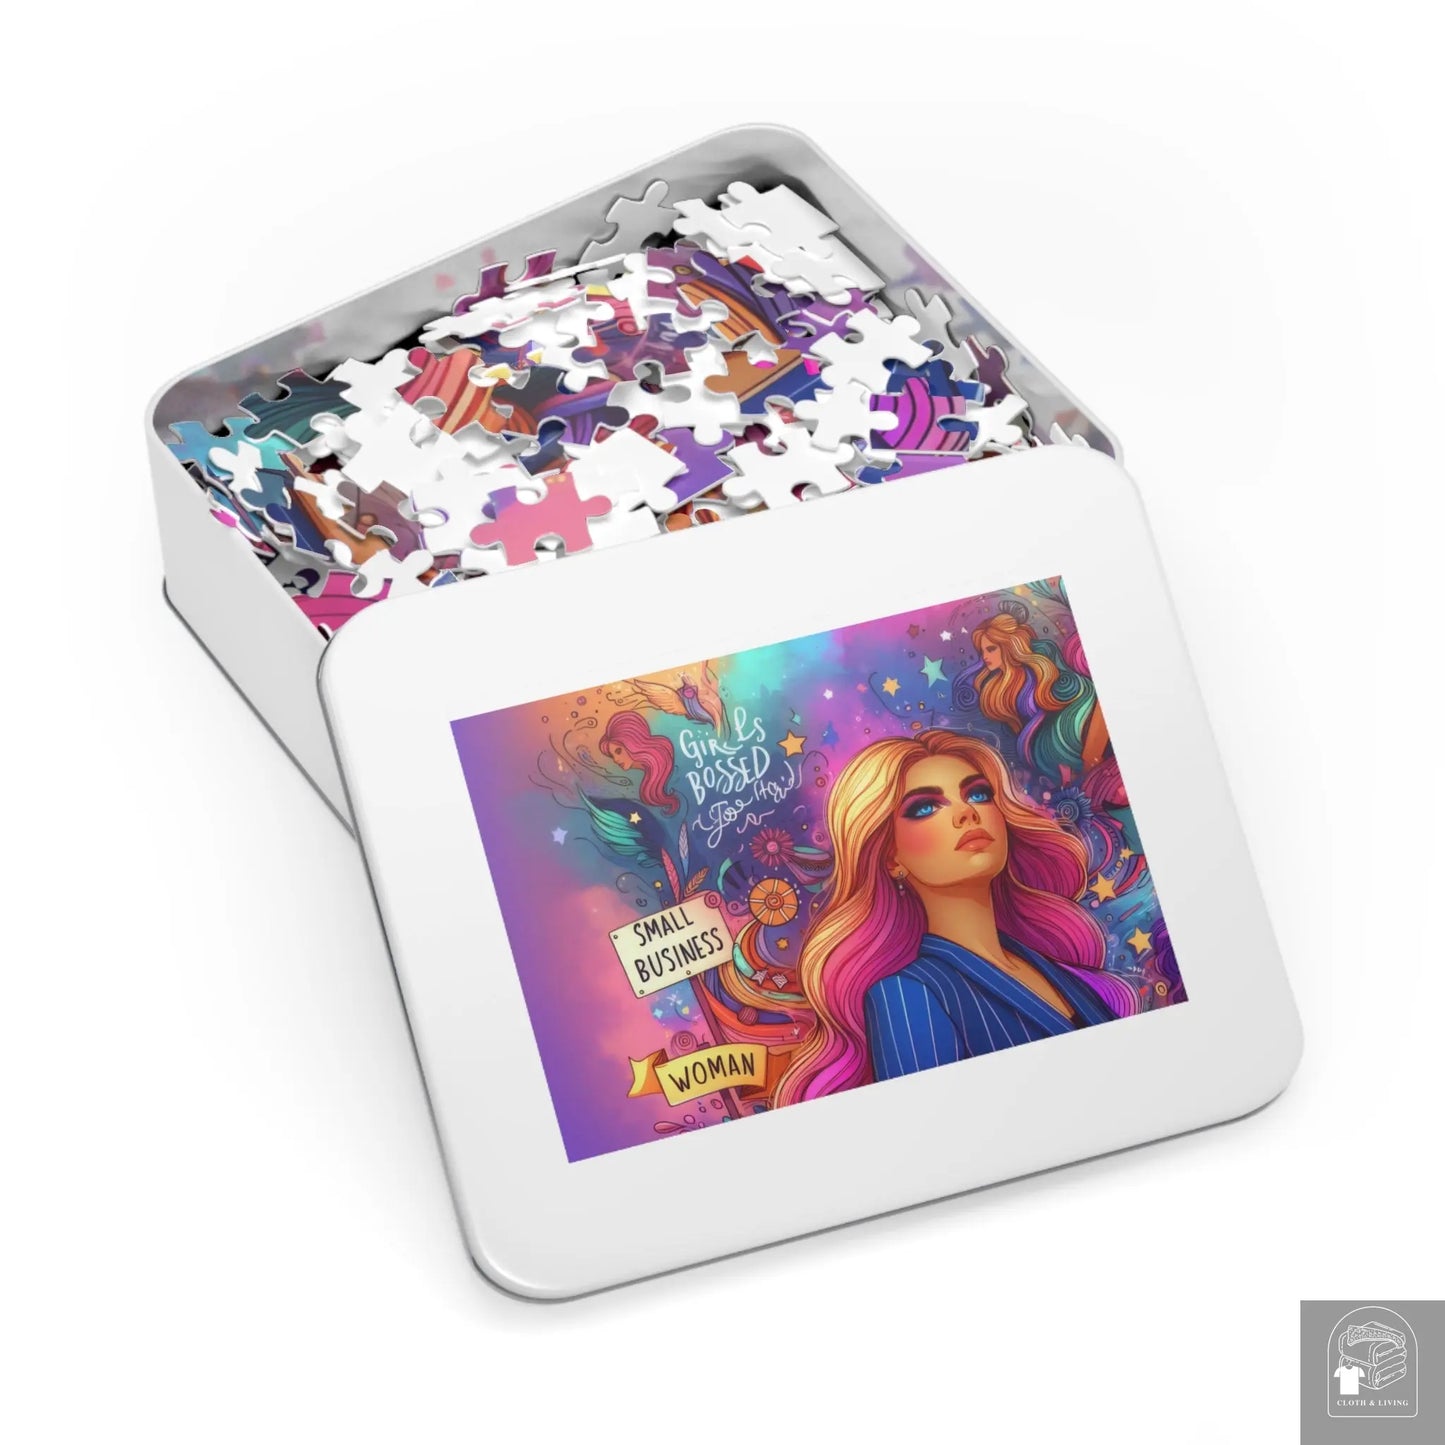 Girl Boss to Hard Puzzle (500 or 1000-Piece) in white metal tin box  Cloth & Living